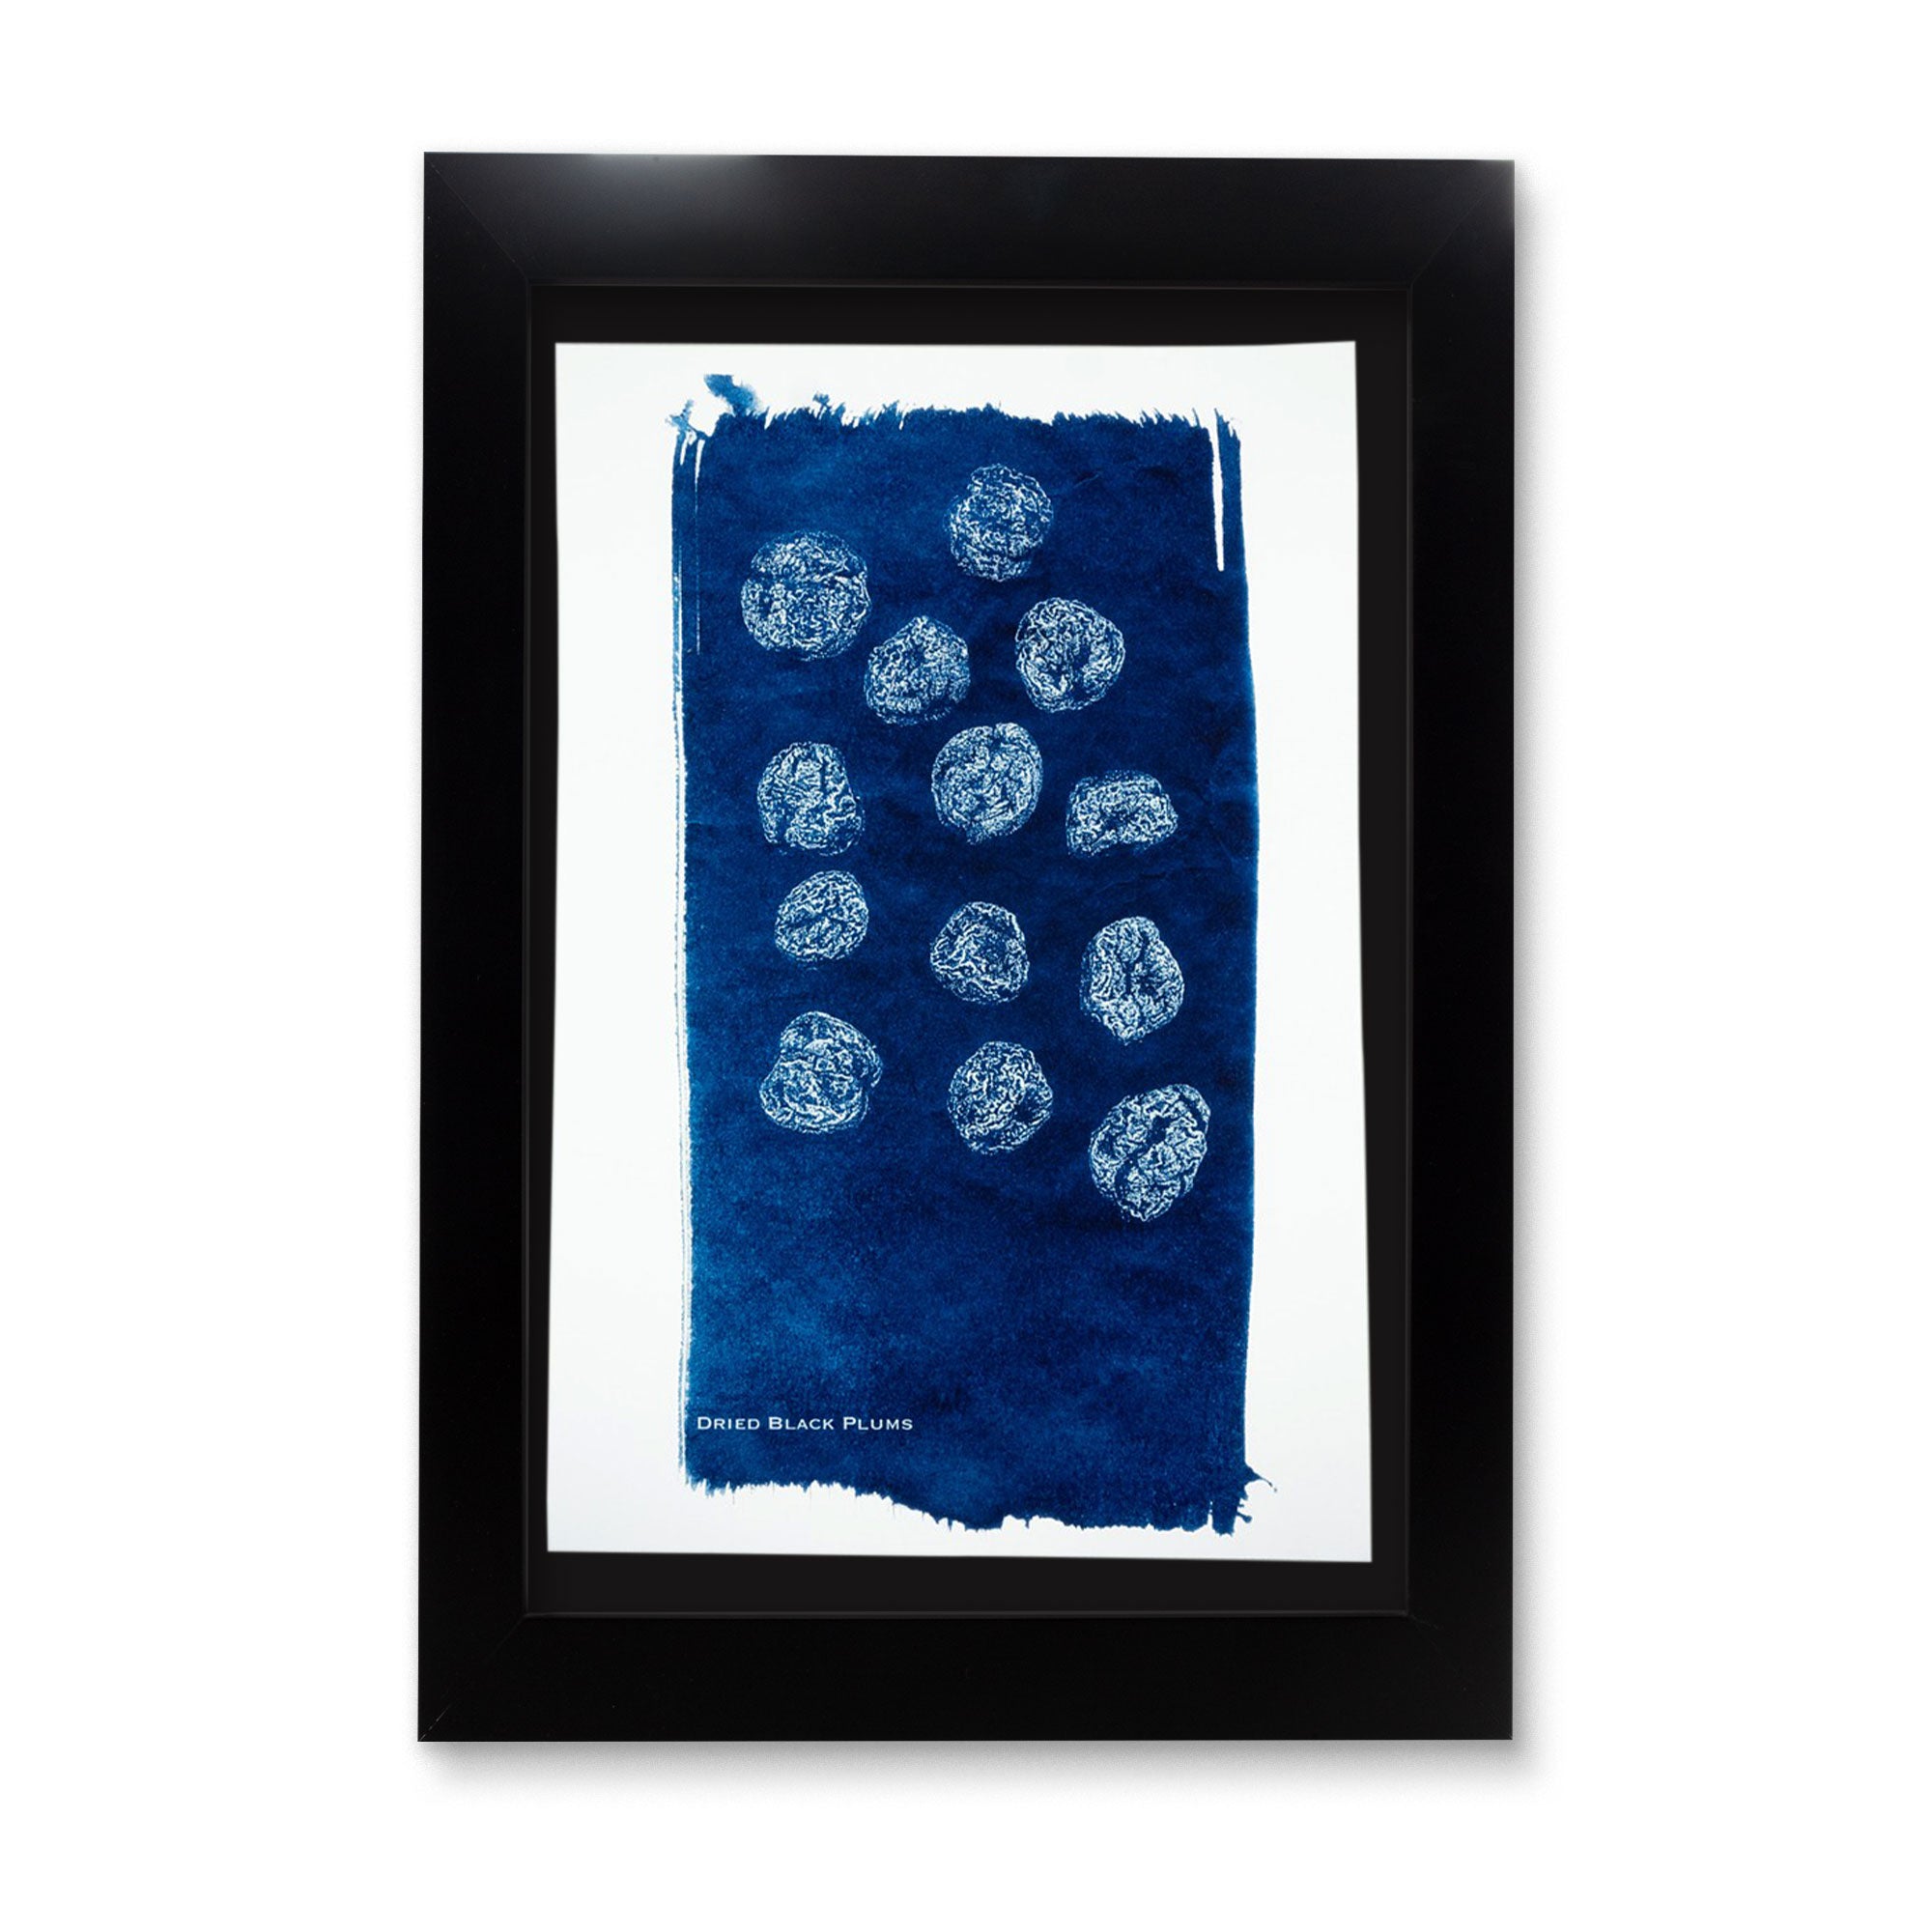 Lineage (Dried Black Plums) Framed Artwork